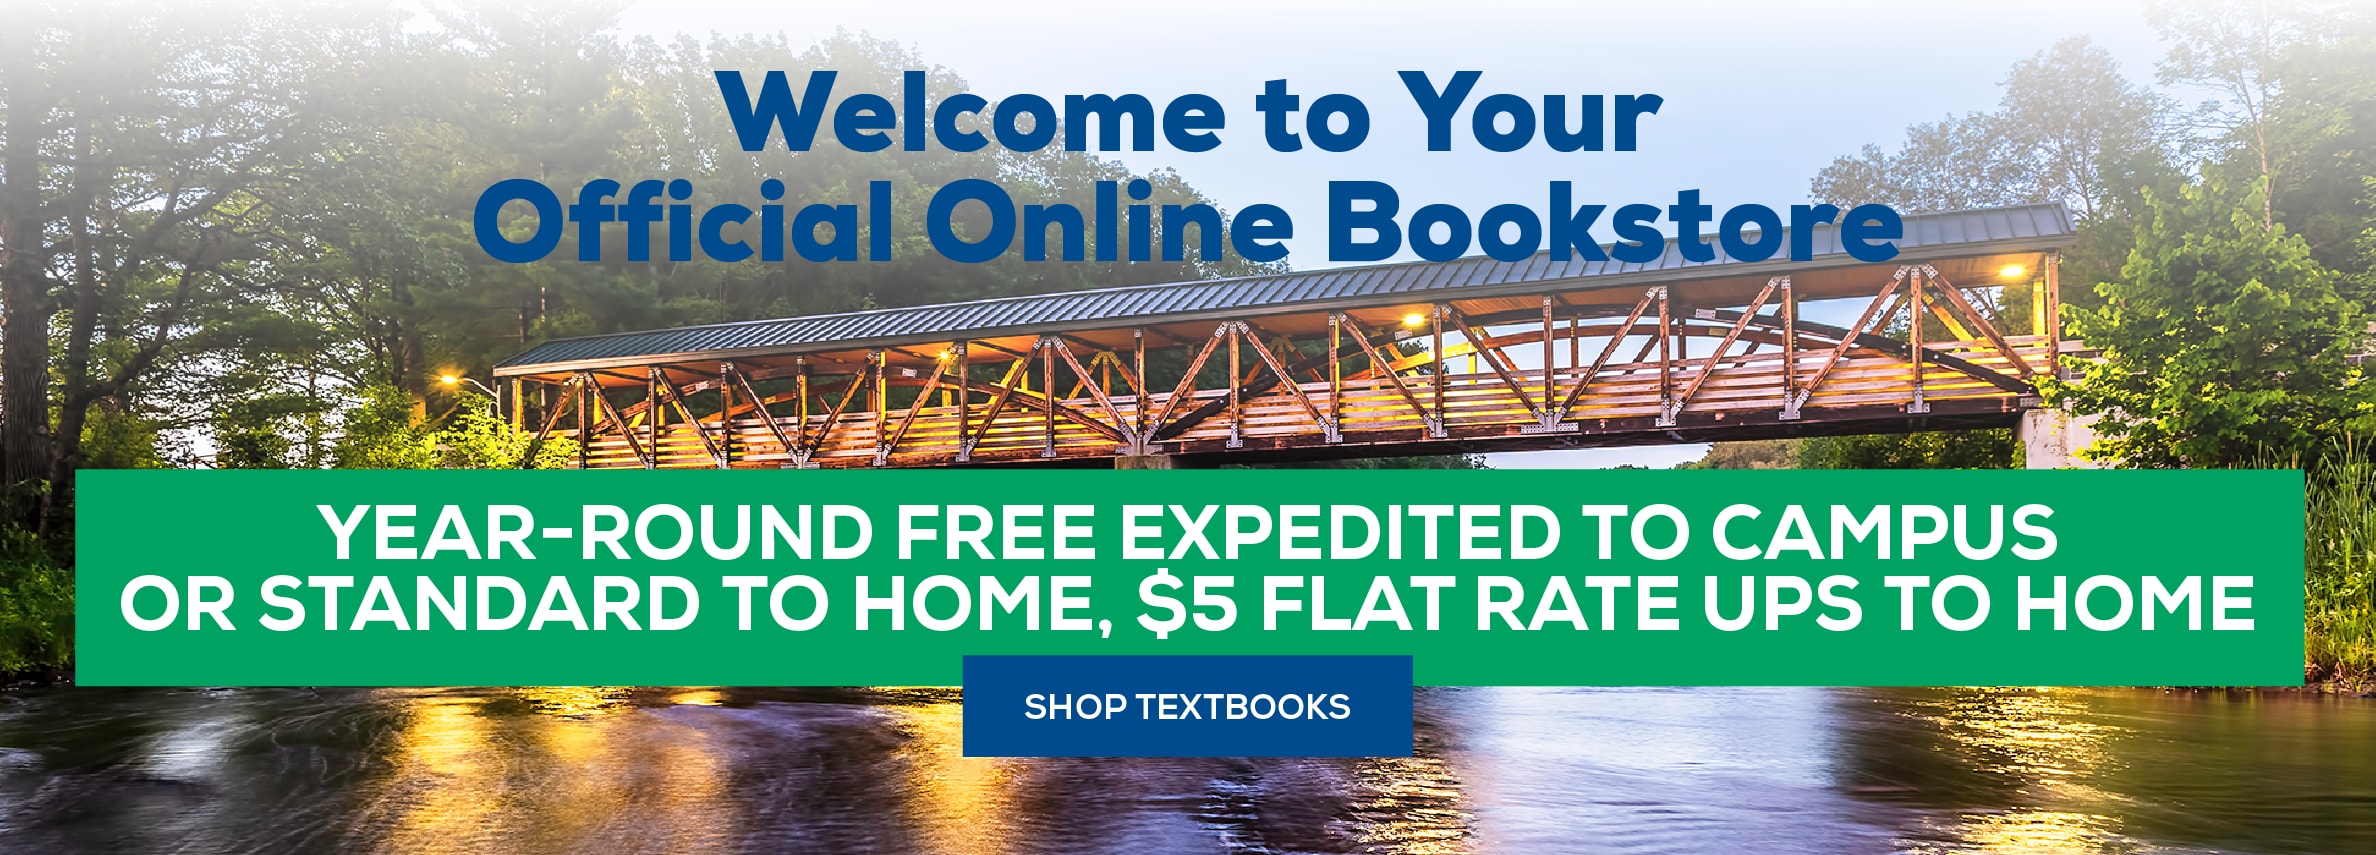 Welcome to your official online bookstore. Year-Round free expedited to campus or standard to home, $5 flat rate UPS to home Shop textbooks